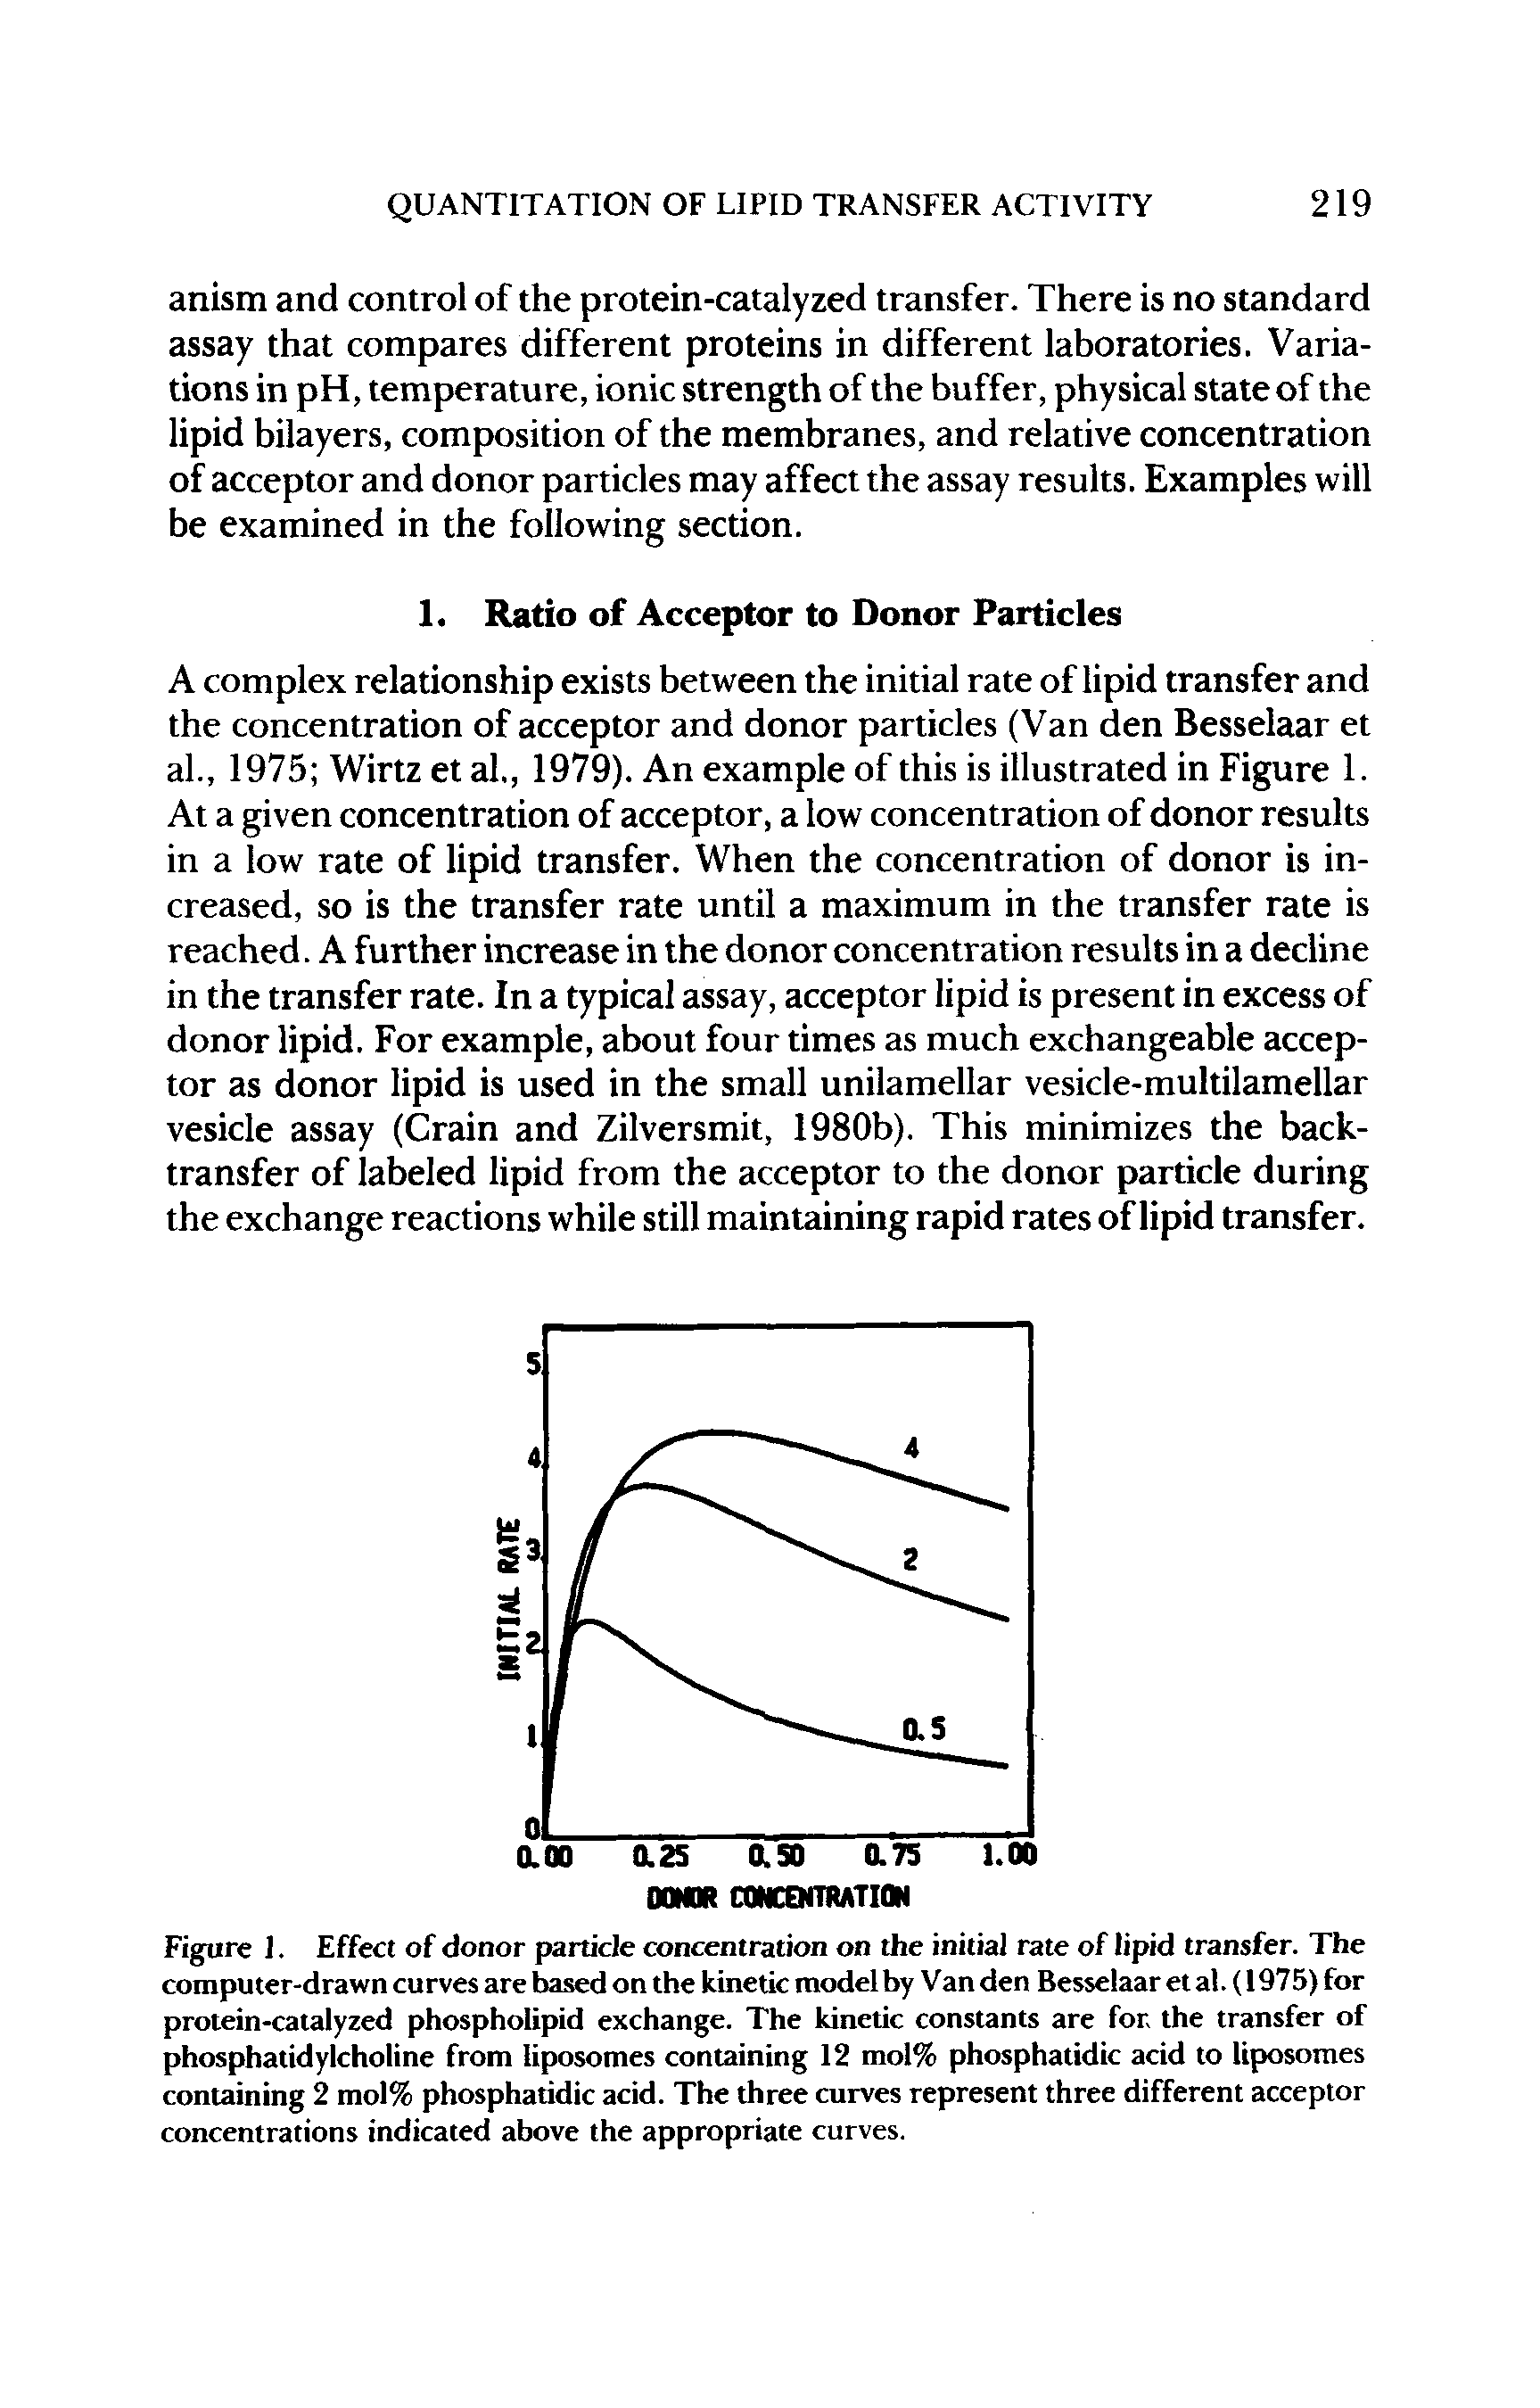 Figure 1. Effect of donor particle concentration on the initial rate of lipid transfer. The computer-drawn curves are based on the kinetic model by Van den Besselaar et al. (1975) for protein-catalyzed phospholipid exchange. The kinetic constants are for, the transfer of phosphatidylcholine from liposomes containing 12 mol% phosphatidic acid to liposomes containing 2 mol% phosphatidic acid. The three curves represent three different acceptor concentrations indicated above the appropriate curves.